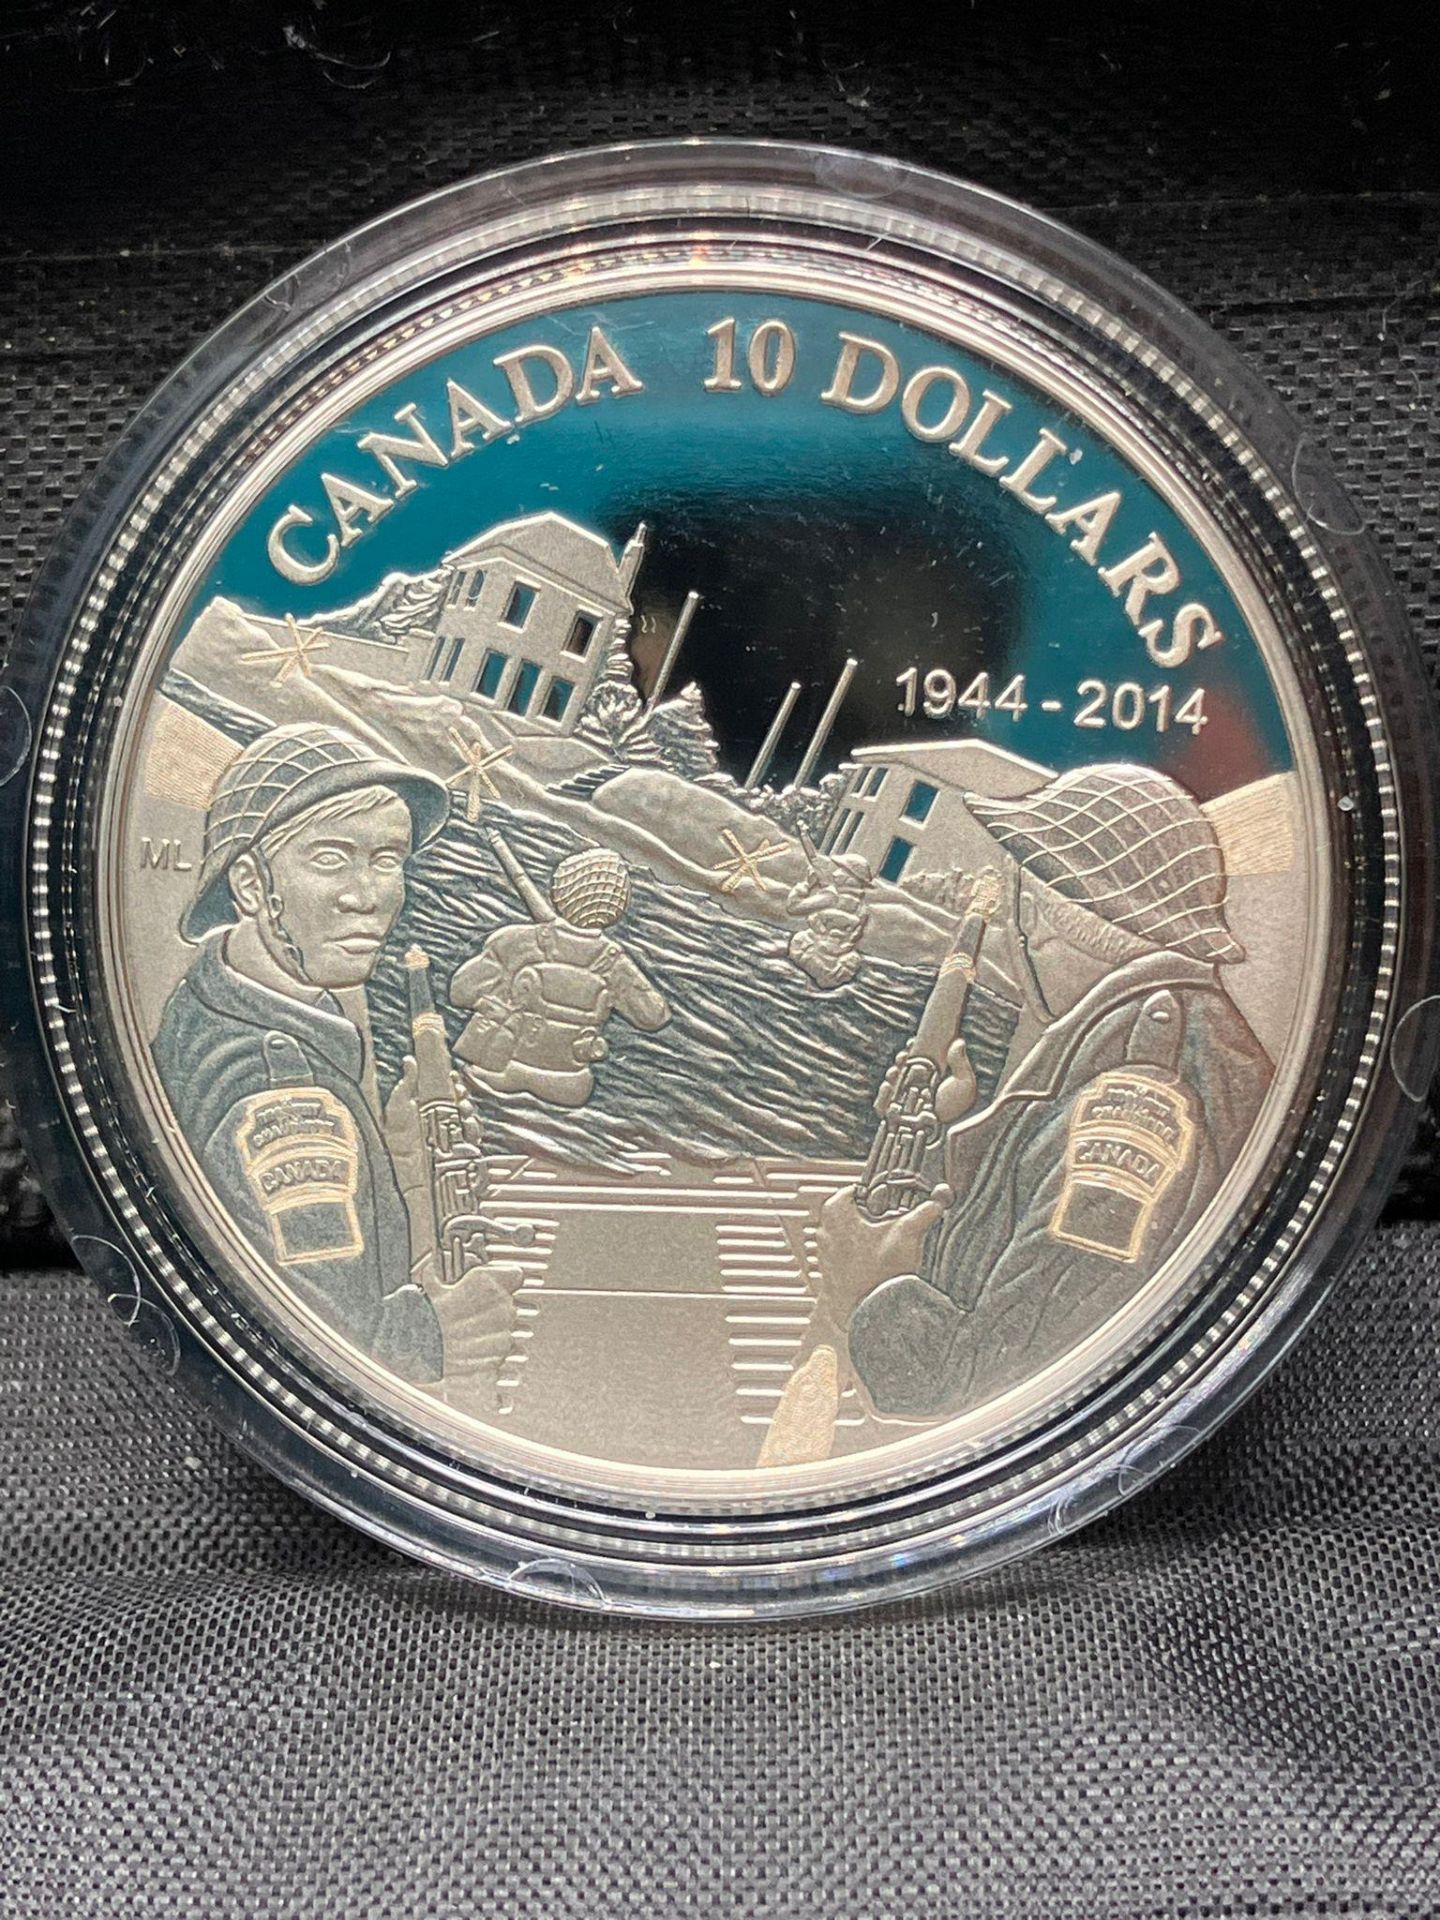 2014 CANADIAN D-DAY 10 DOLLAR COIN. Struck in PURE SILVER by the Royal Canadian Mint to